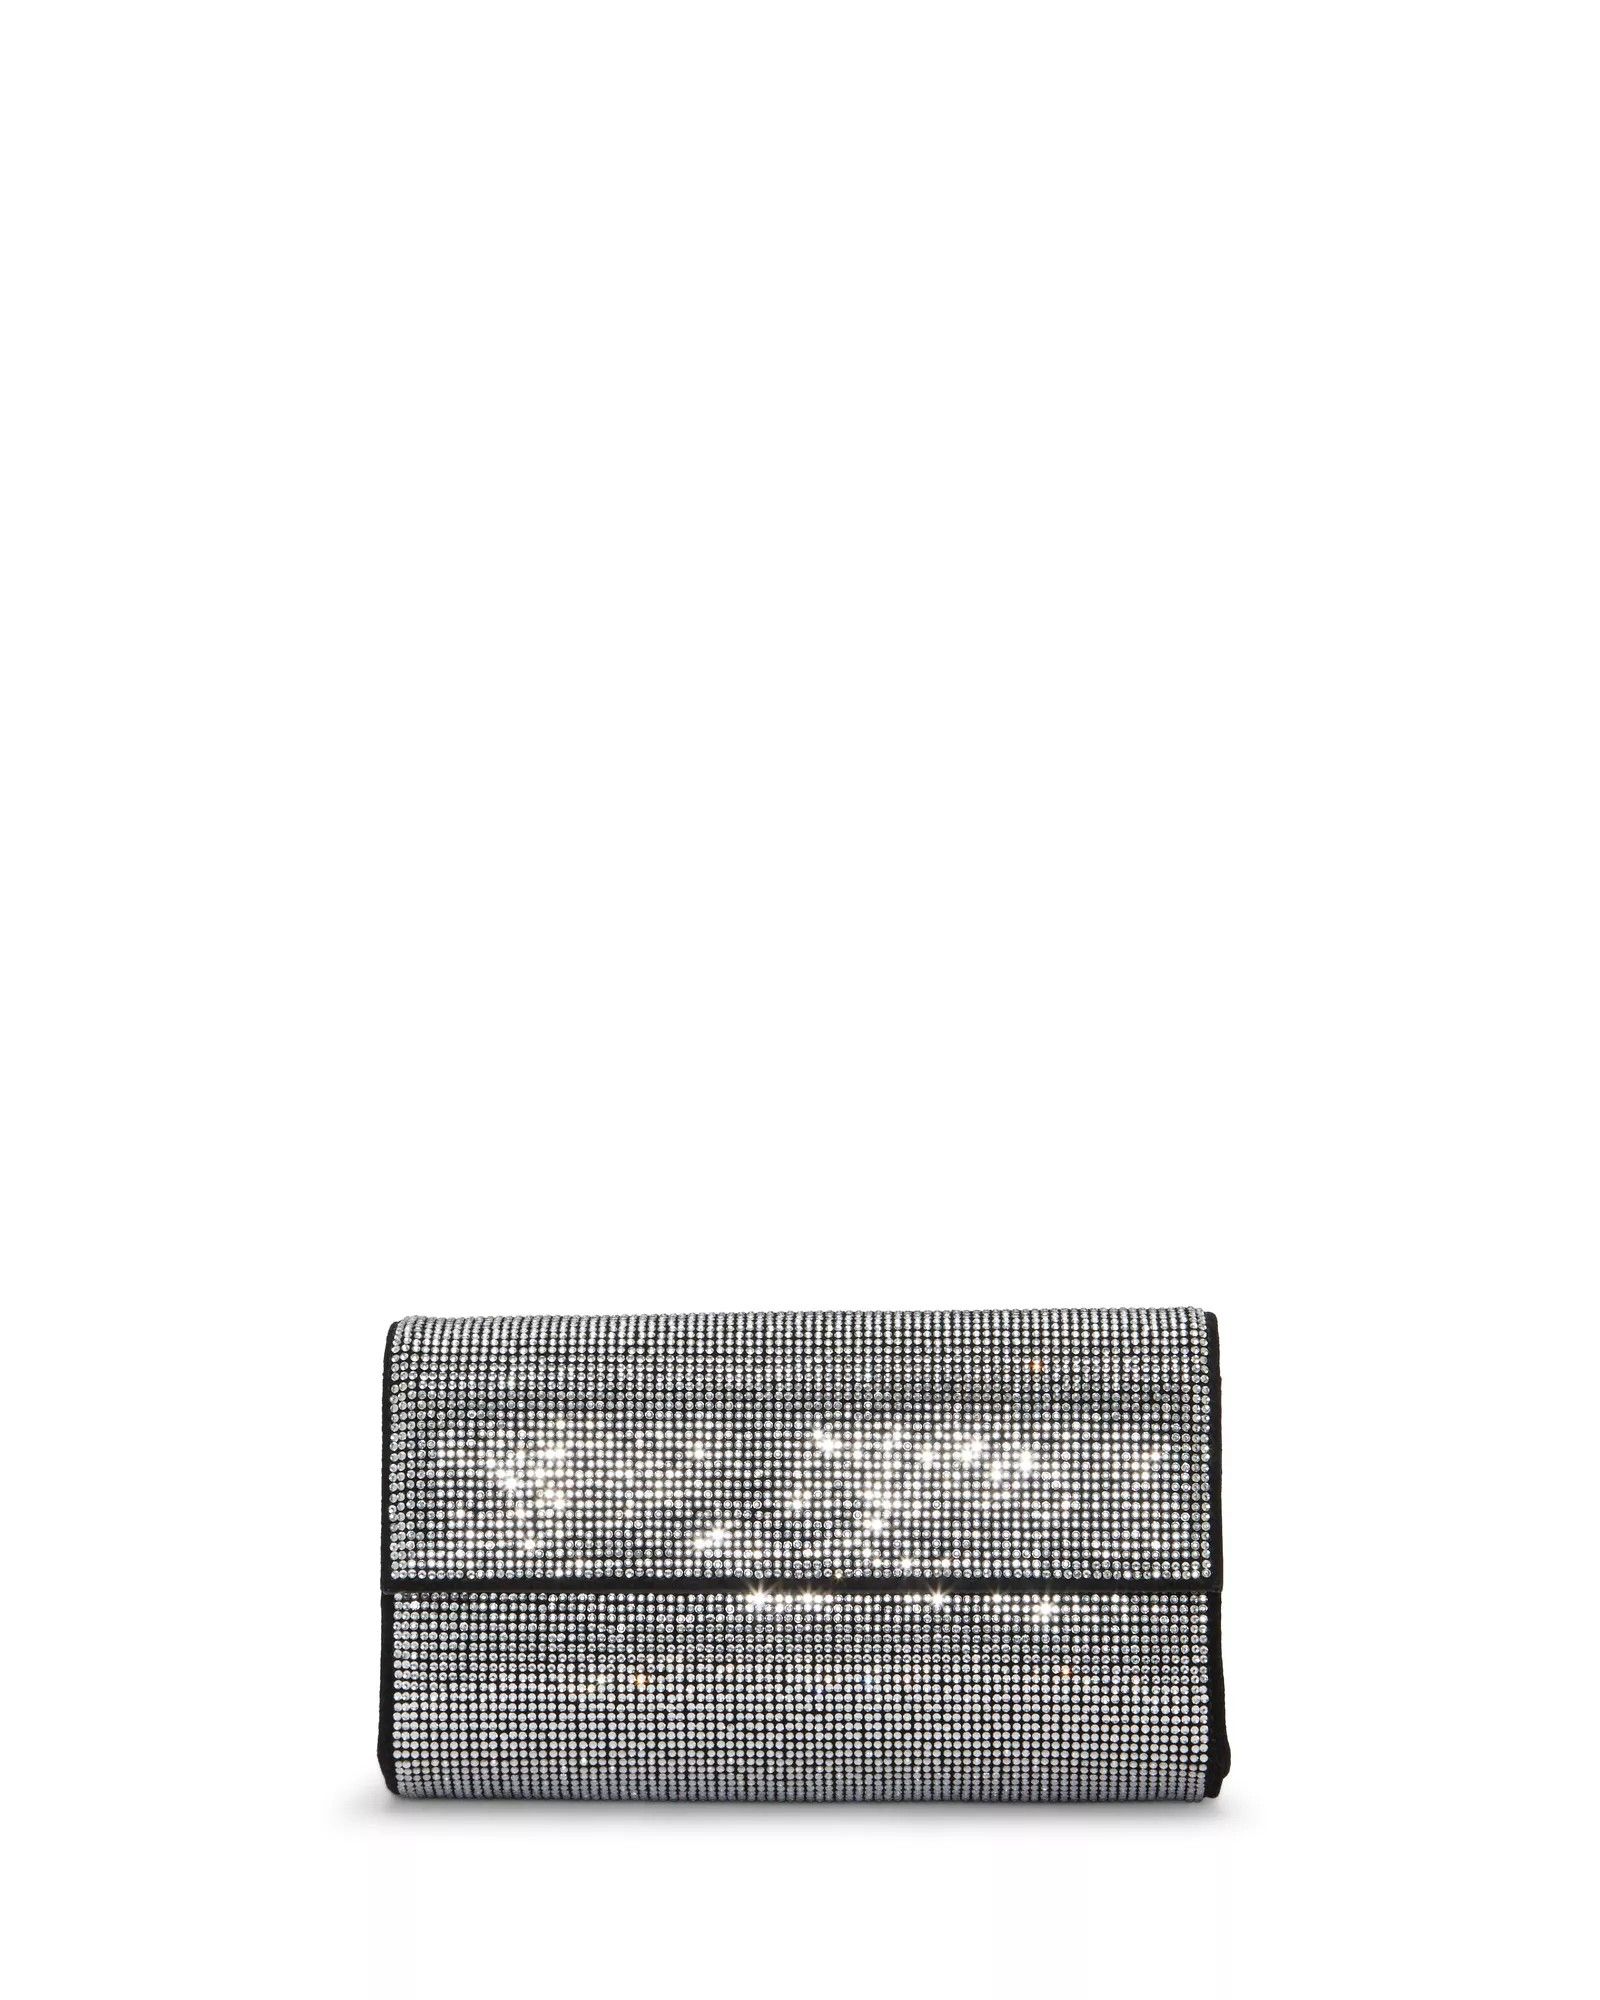 Vince Camuto Katey Clutch | Vince Camuto